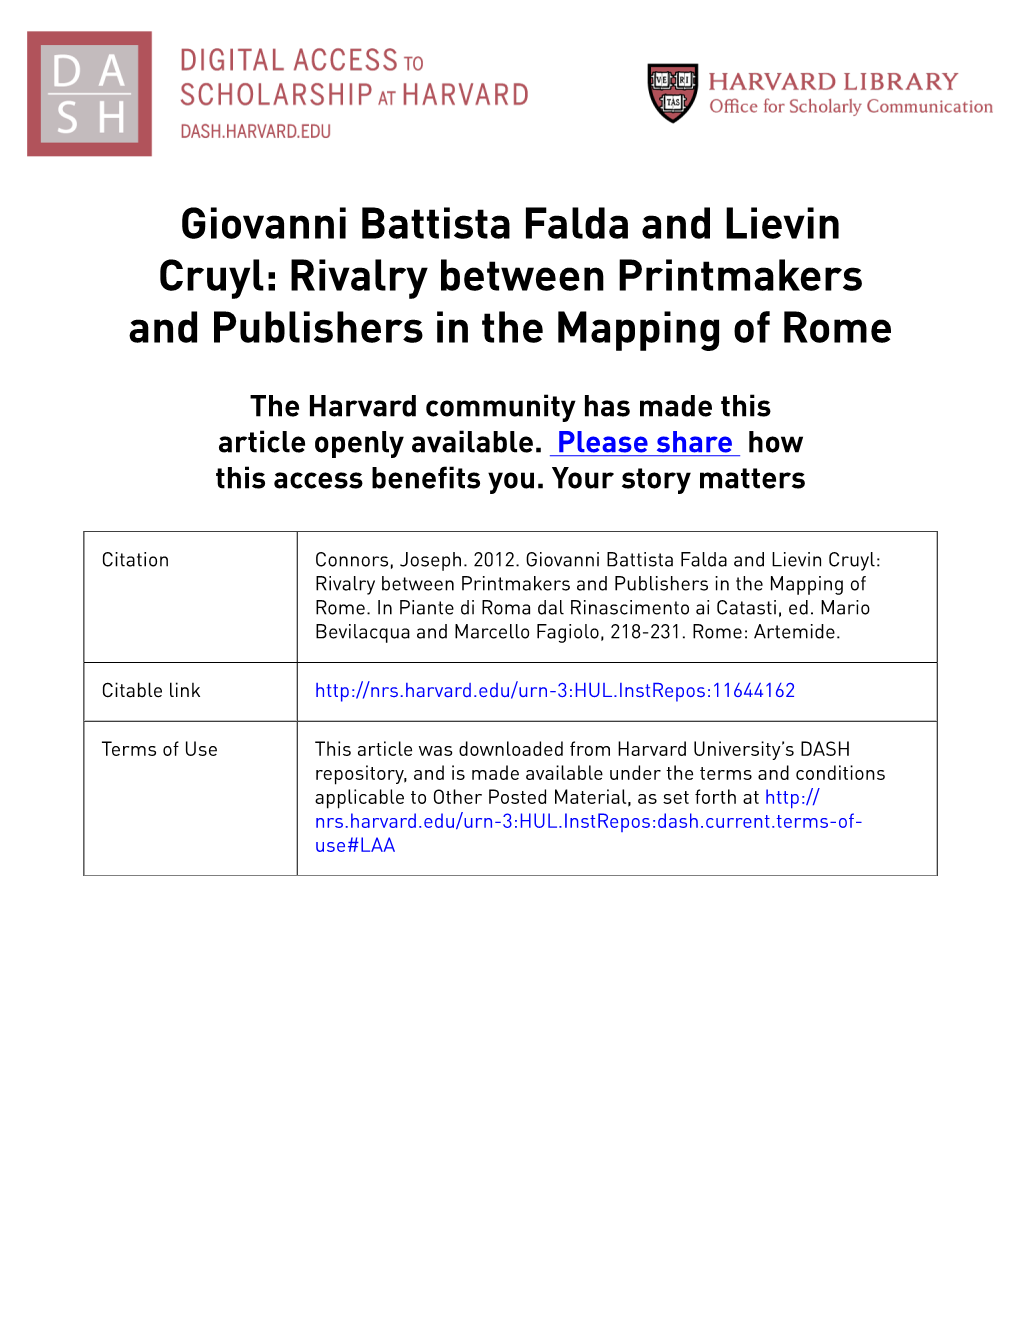 Giovanni Battista Falda and Lievin Cruyl: Rivalry Between Printmakers and Publishers in the Mapping of Rome